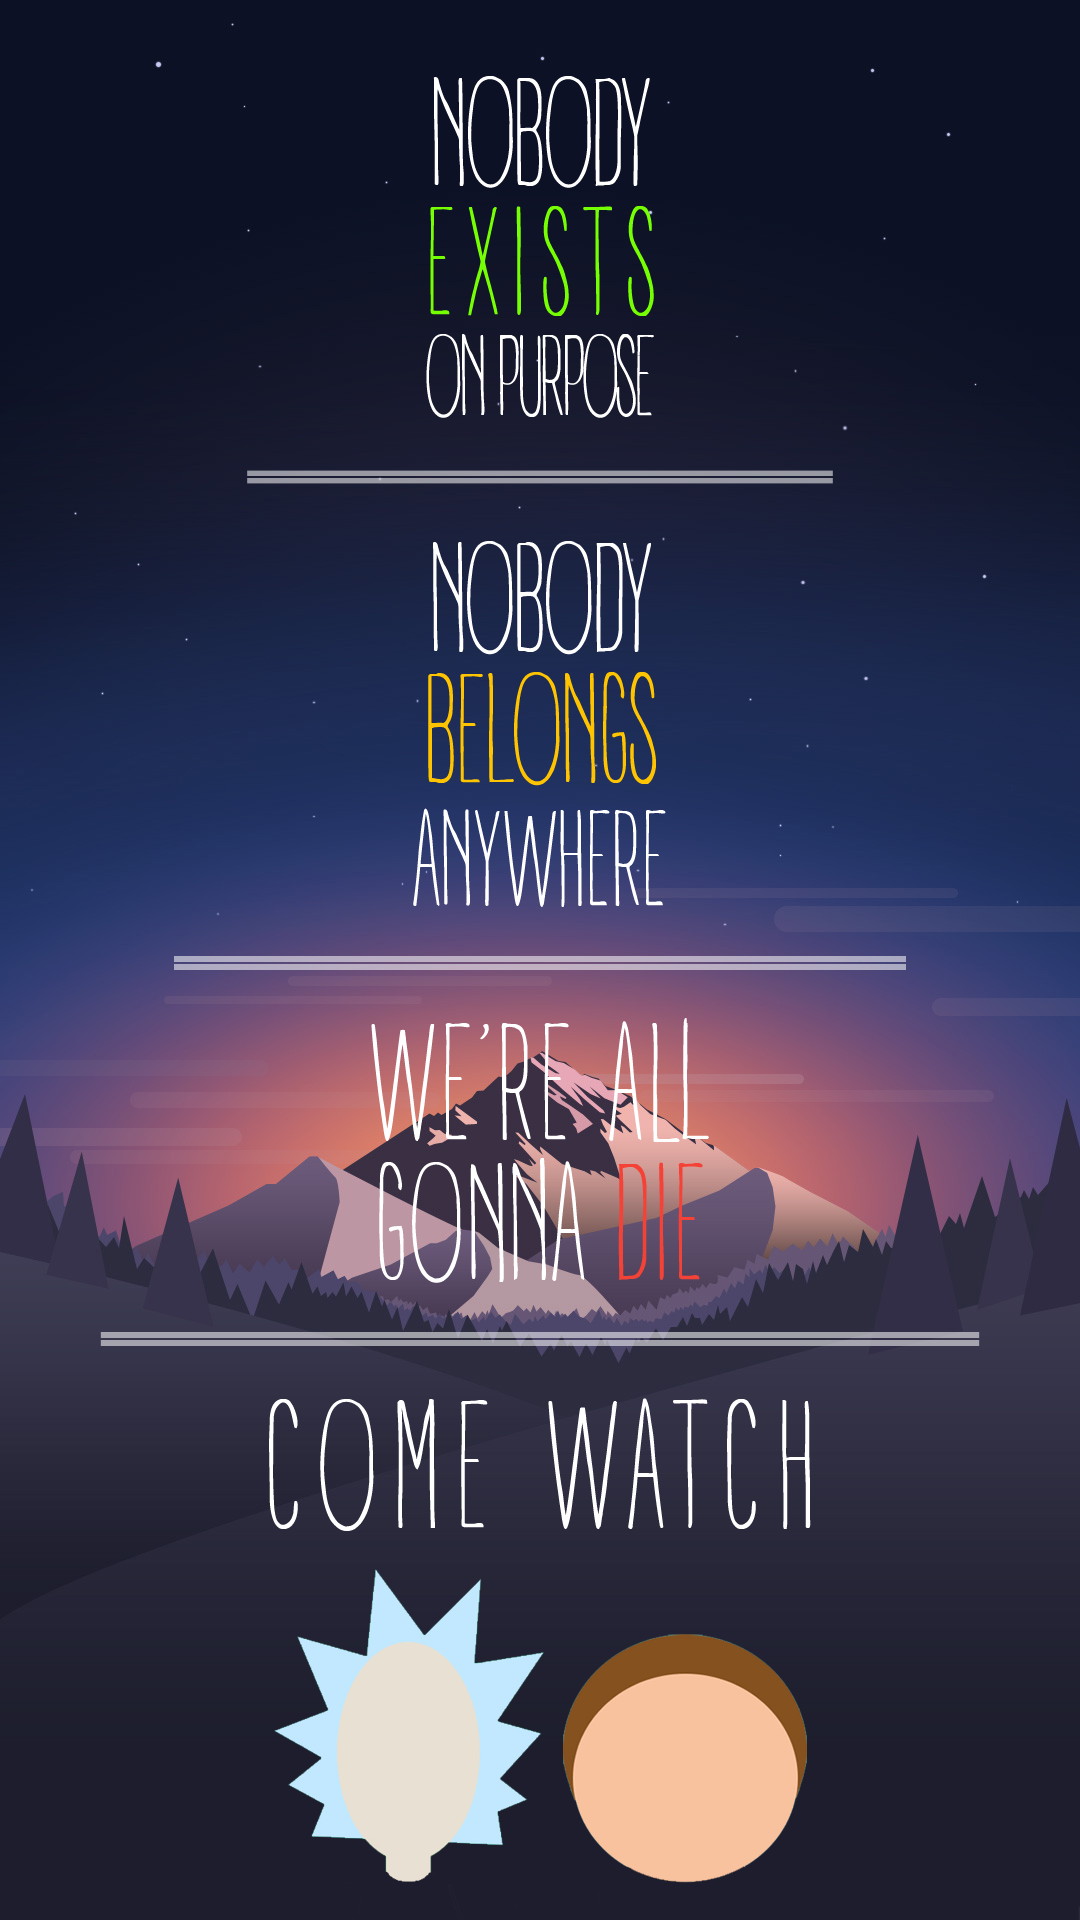 Made this mobile wallpaper of my favorite quote from the show